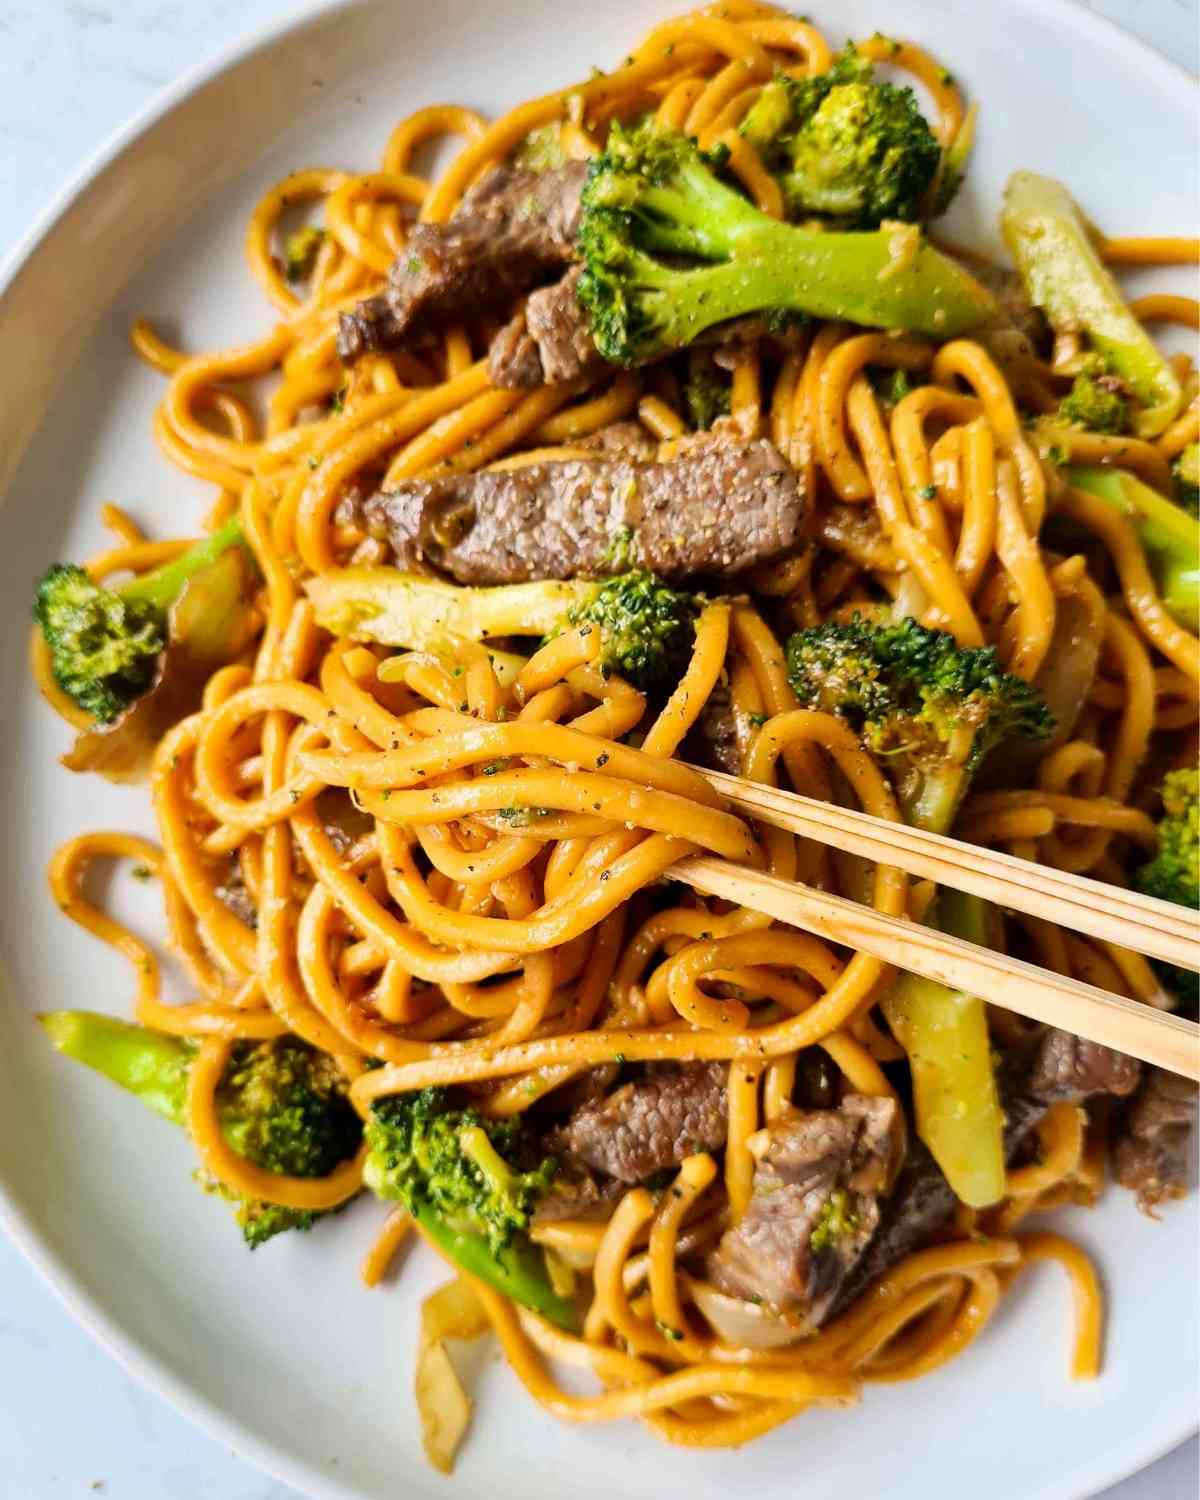 Stir fried noodles with broccoli, beef strips on a large white plate and a pair of chopsticks